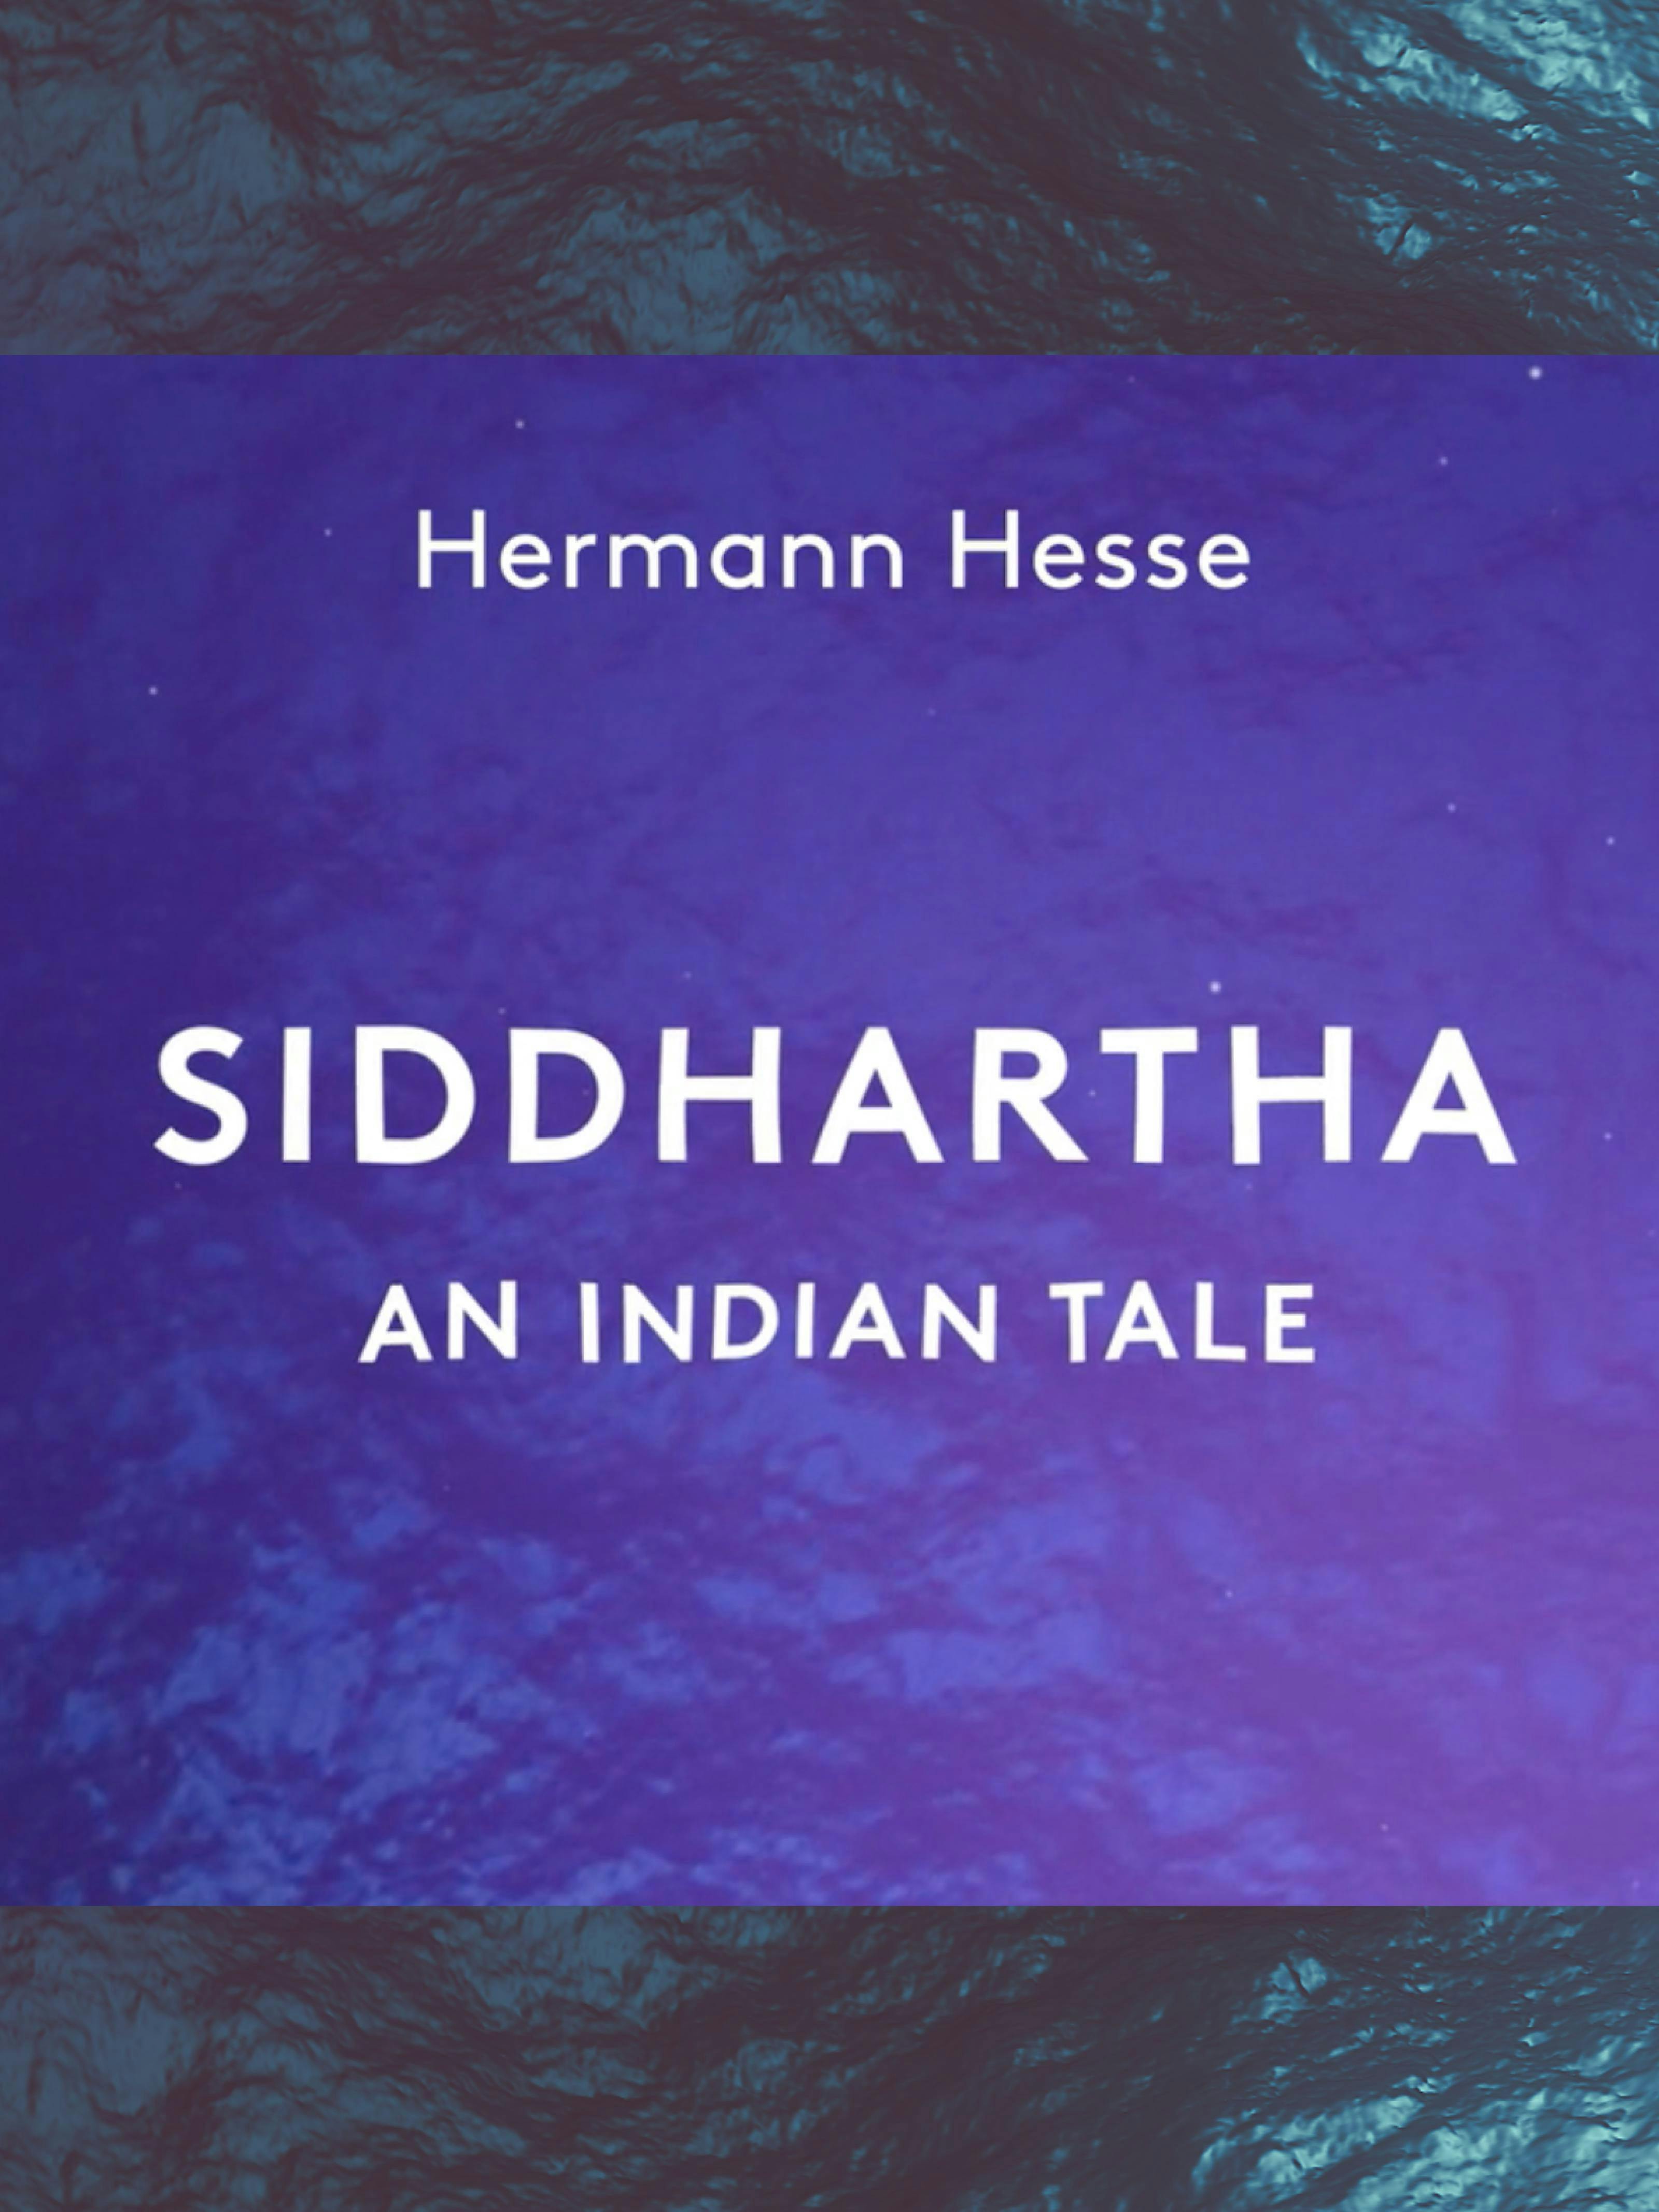 Siddhartha: unabridged narration with soundtrack - undefined